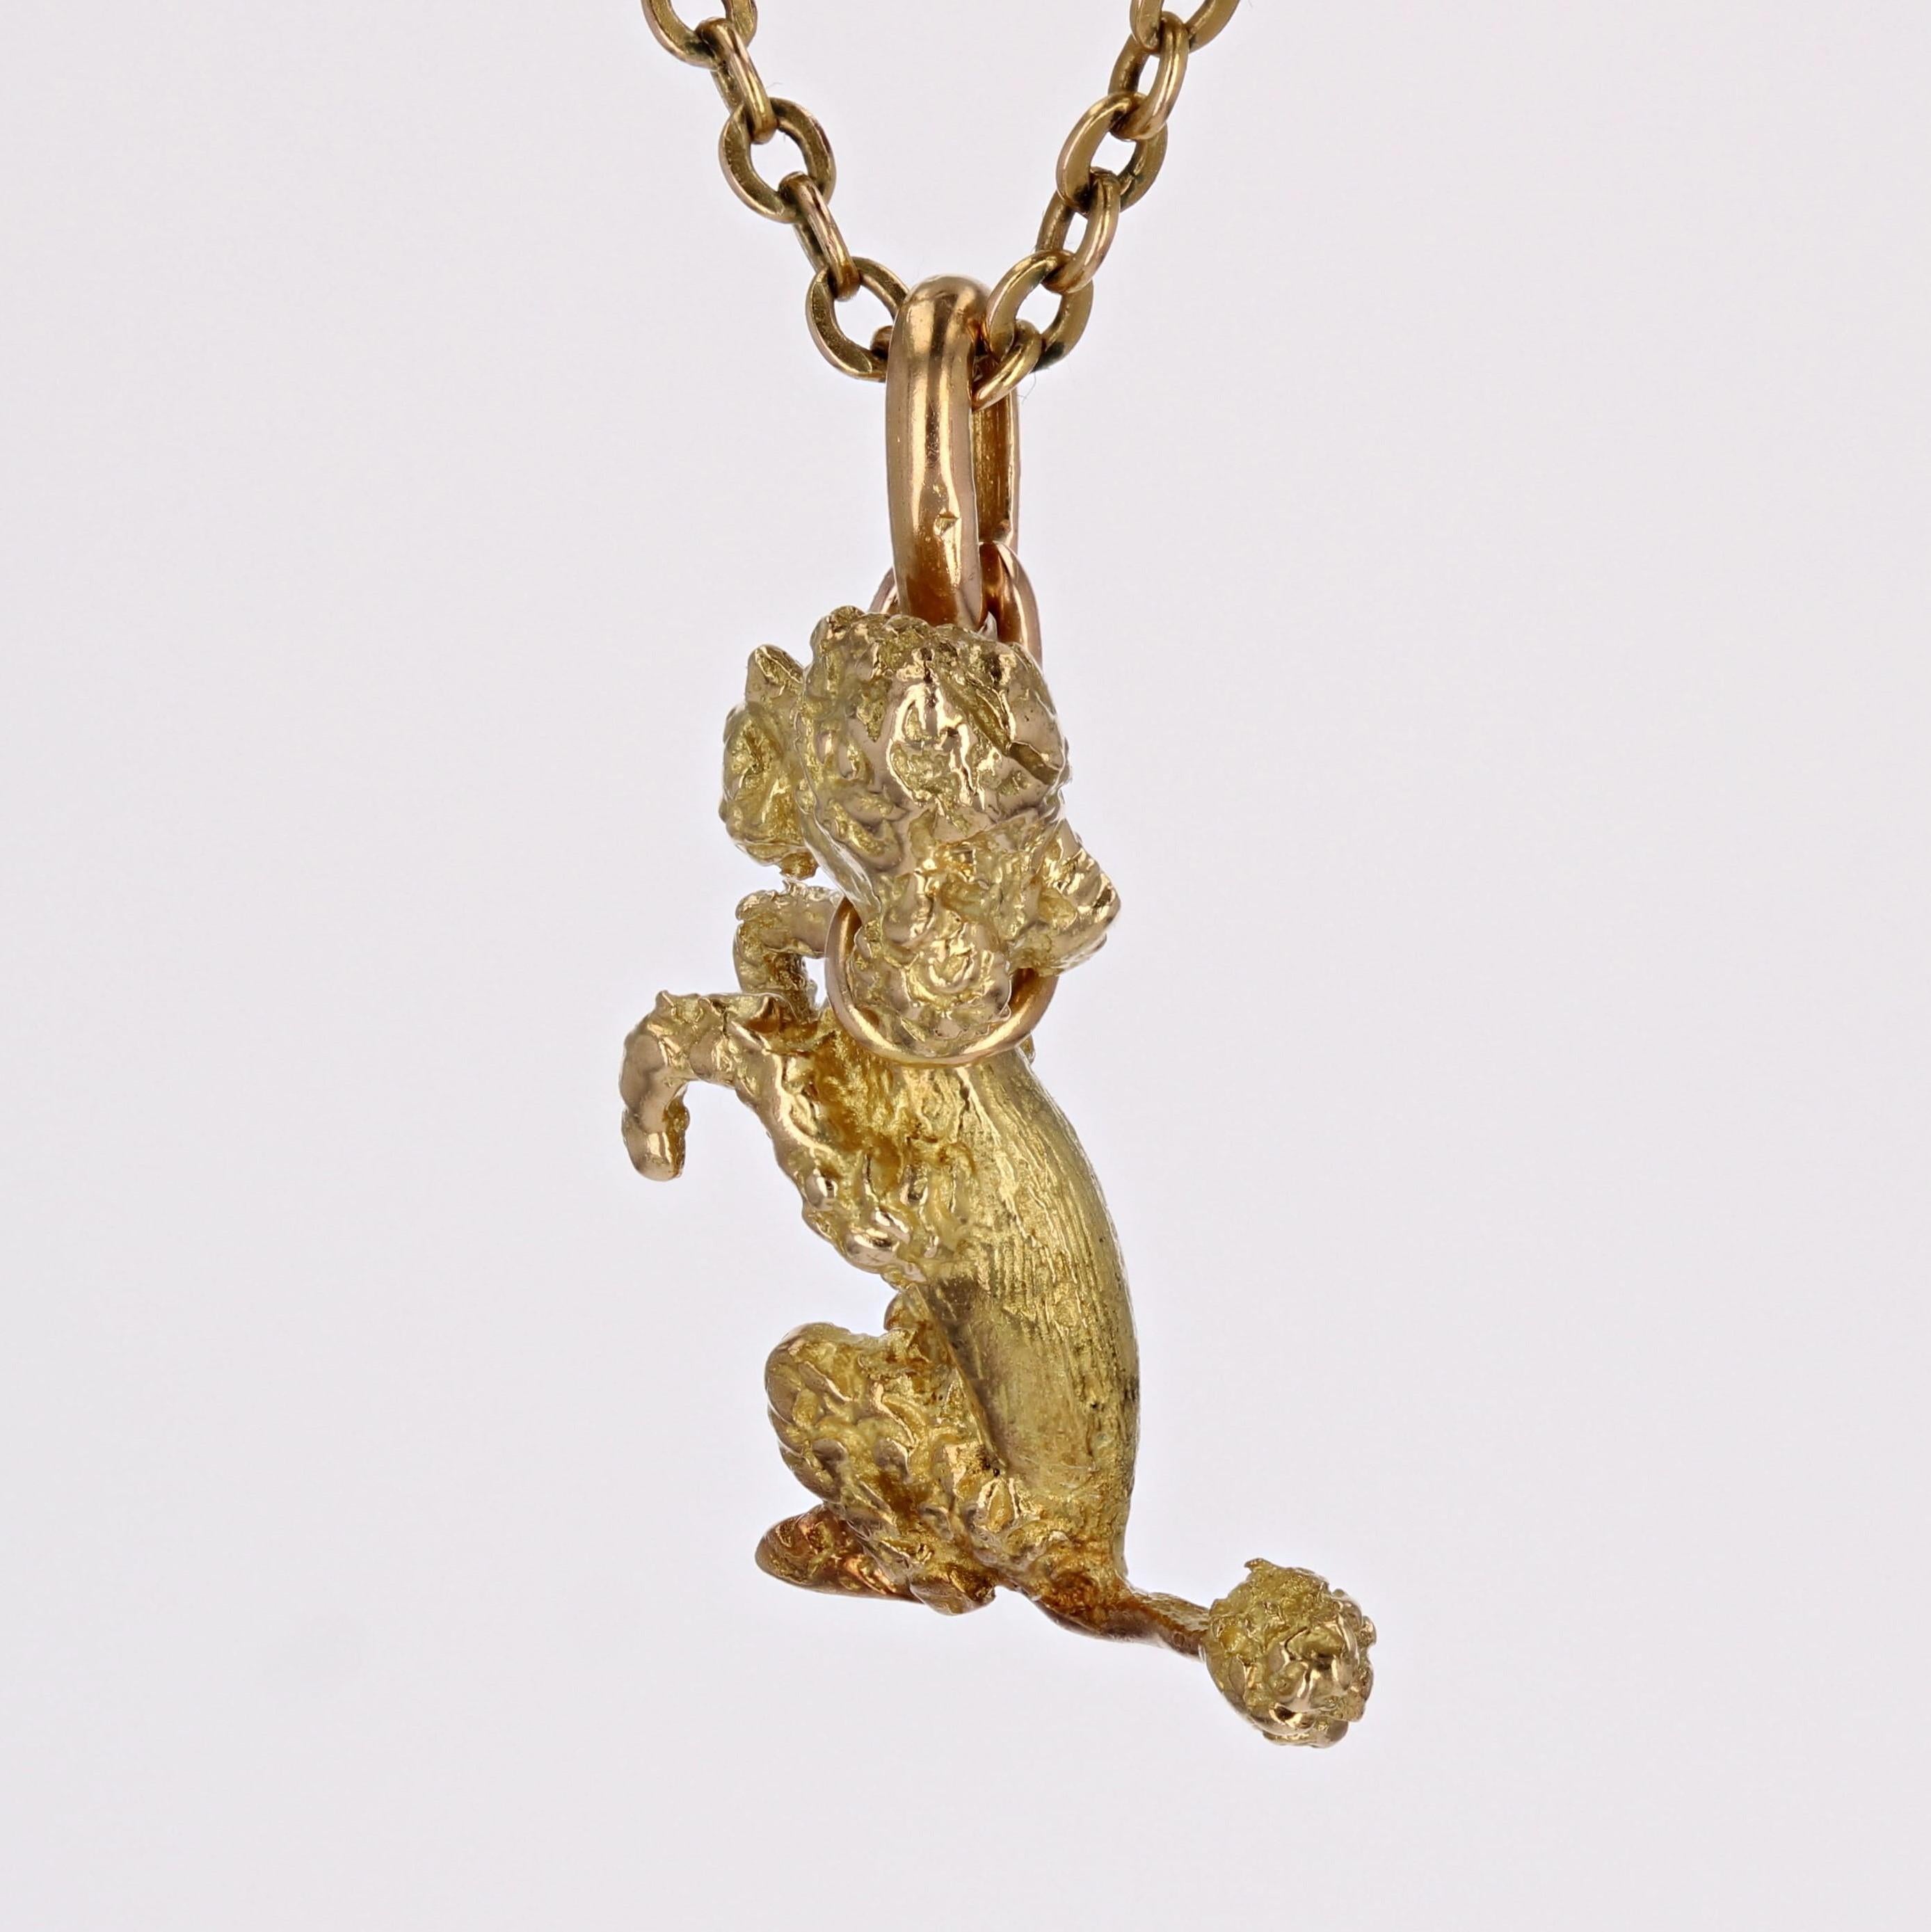 French 1960s 18 Karat Yellow Gold Sitting Poodle Charm Pendant For Sale 2